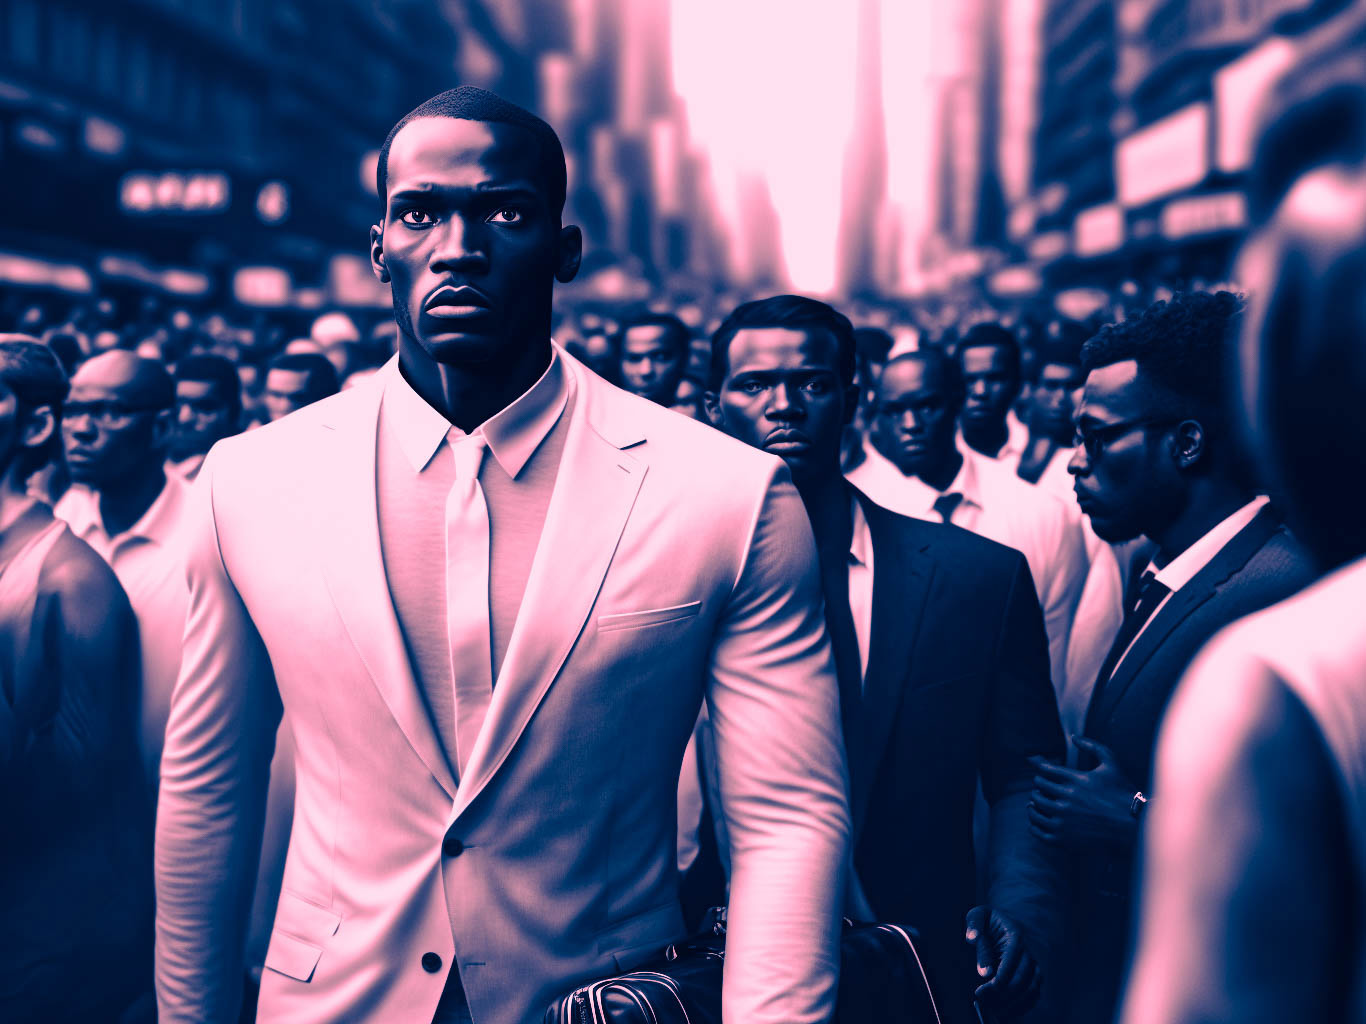 AI generated picture of a crowded street with people wearing suits